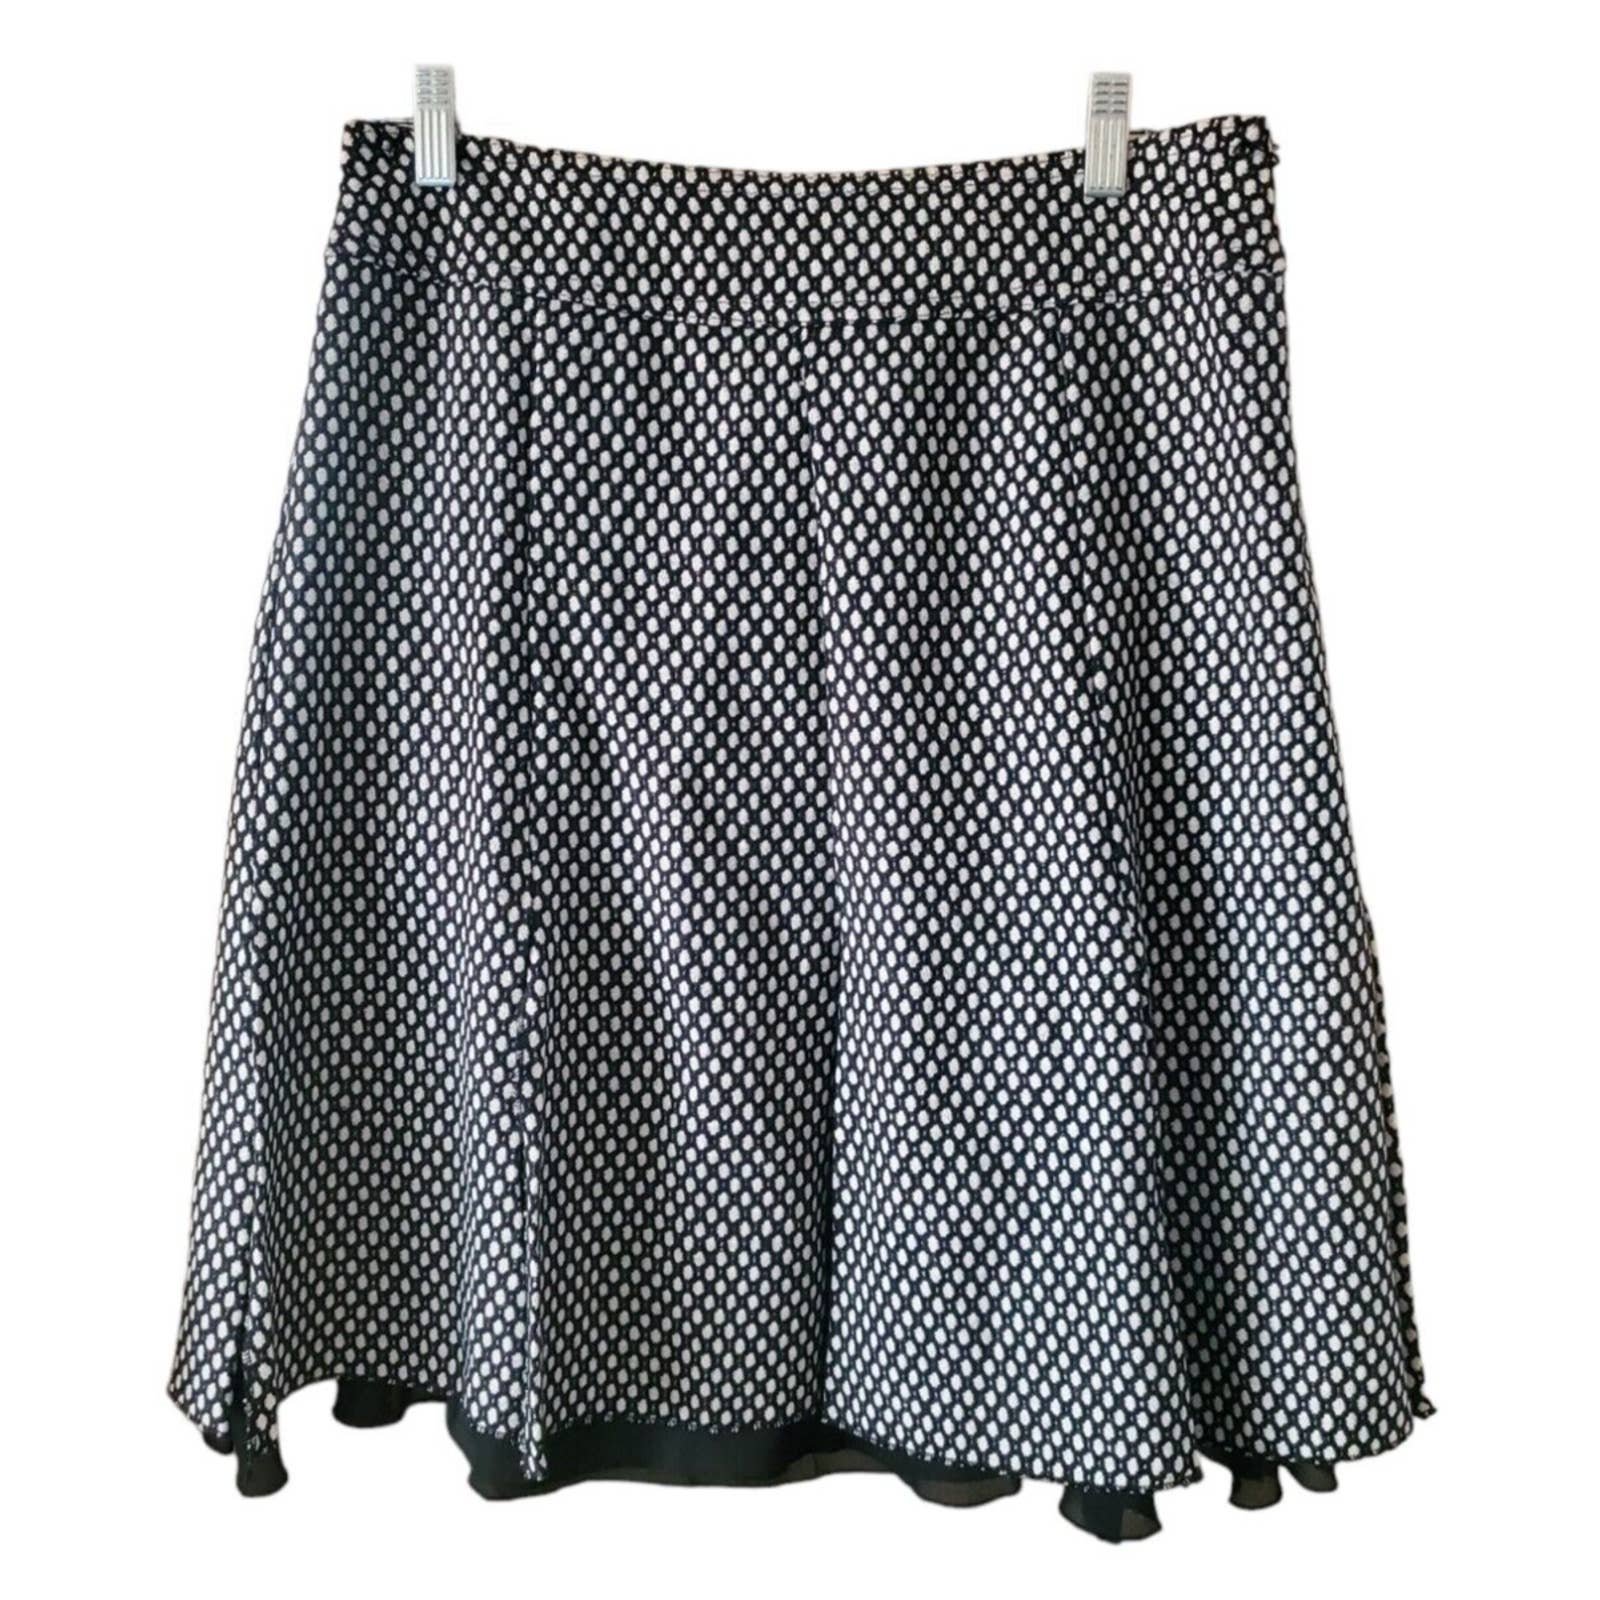 Latest  Sunny Leigh Black & White Woven Layered Knee Length A-Line Skirt Sz 8 mo8UAJr3r Outlet Store